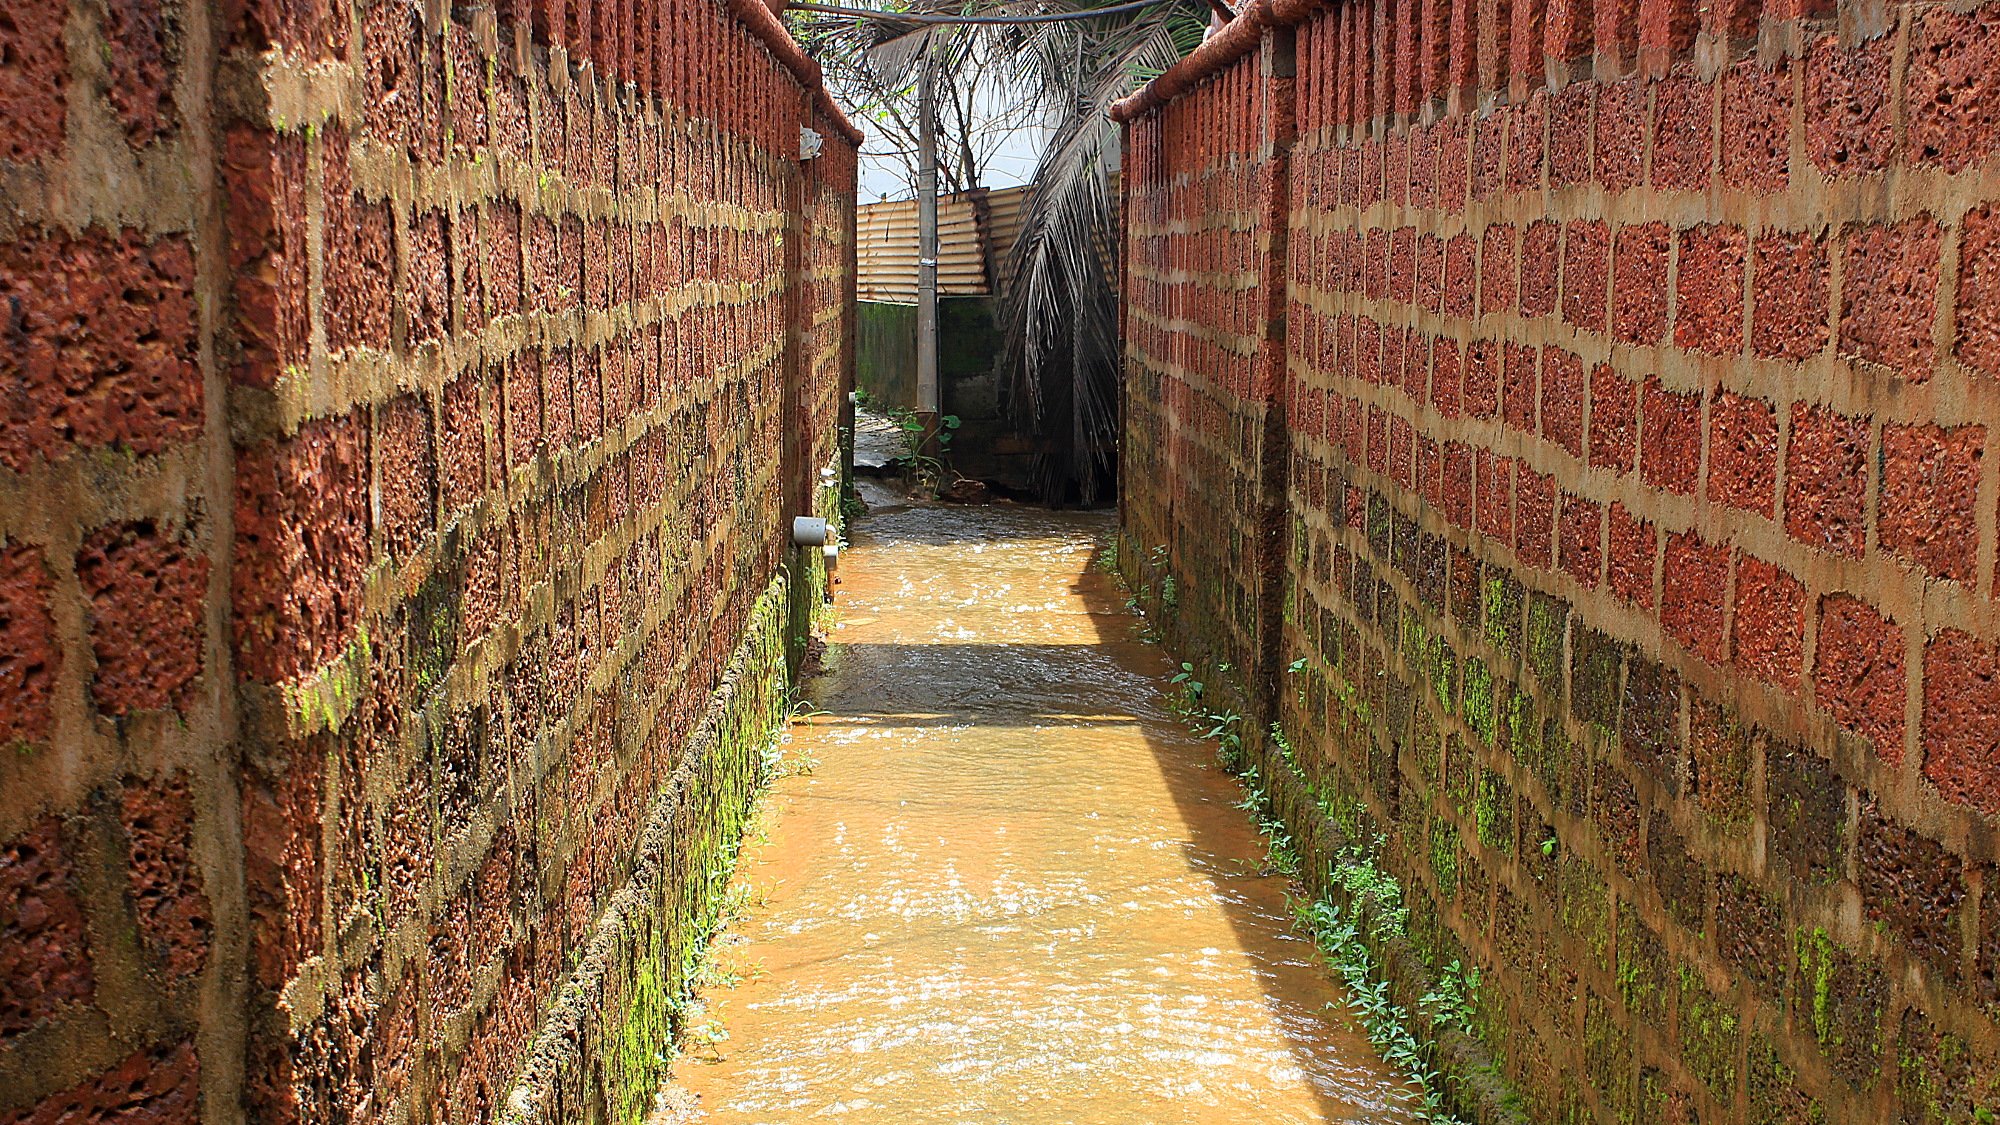 A small path with flowing water between two red brick walls.